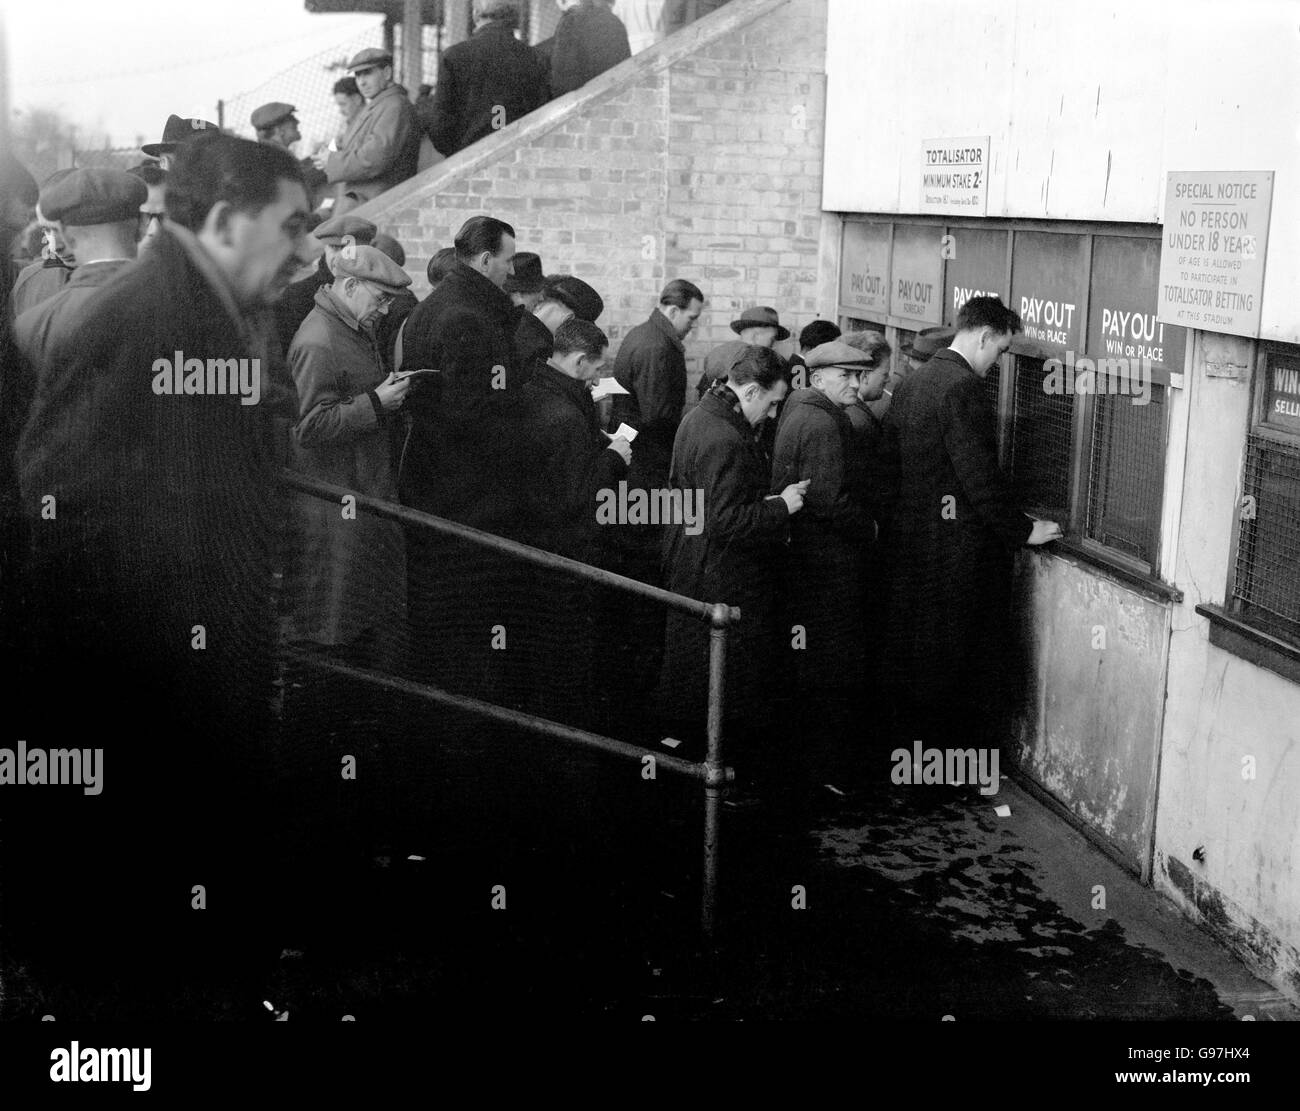 Greyhound Racing - Hackney Wick Stadium. Punters collect their winnings from the Tote Stock Photo